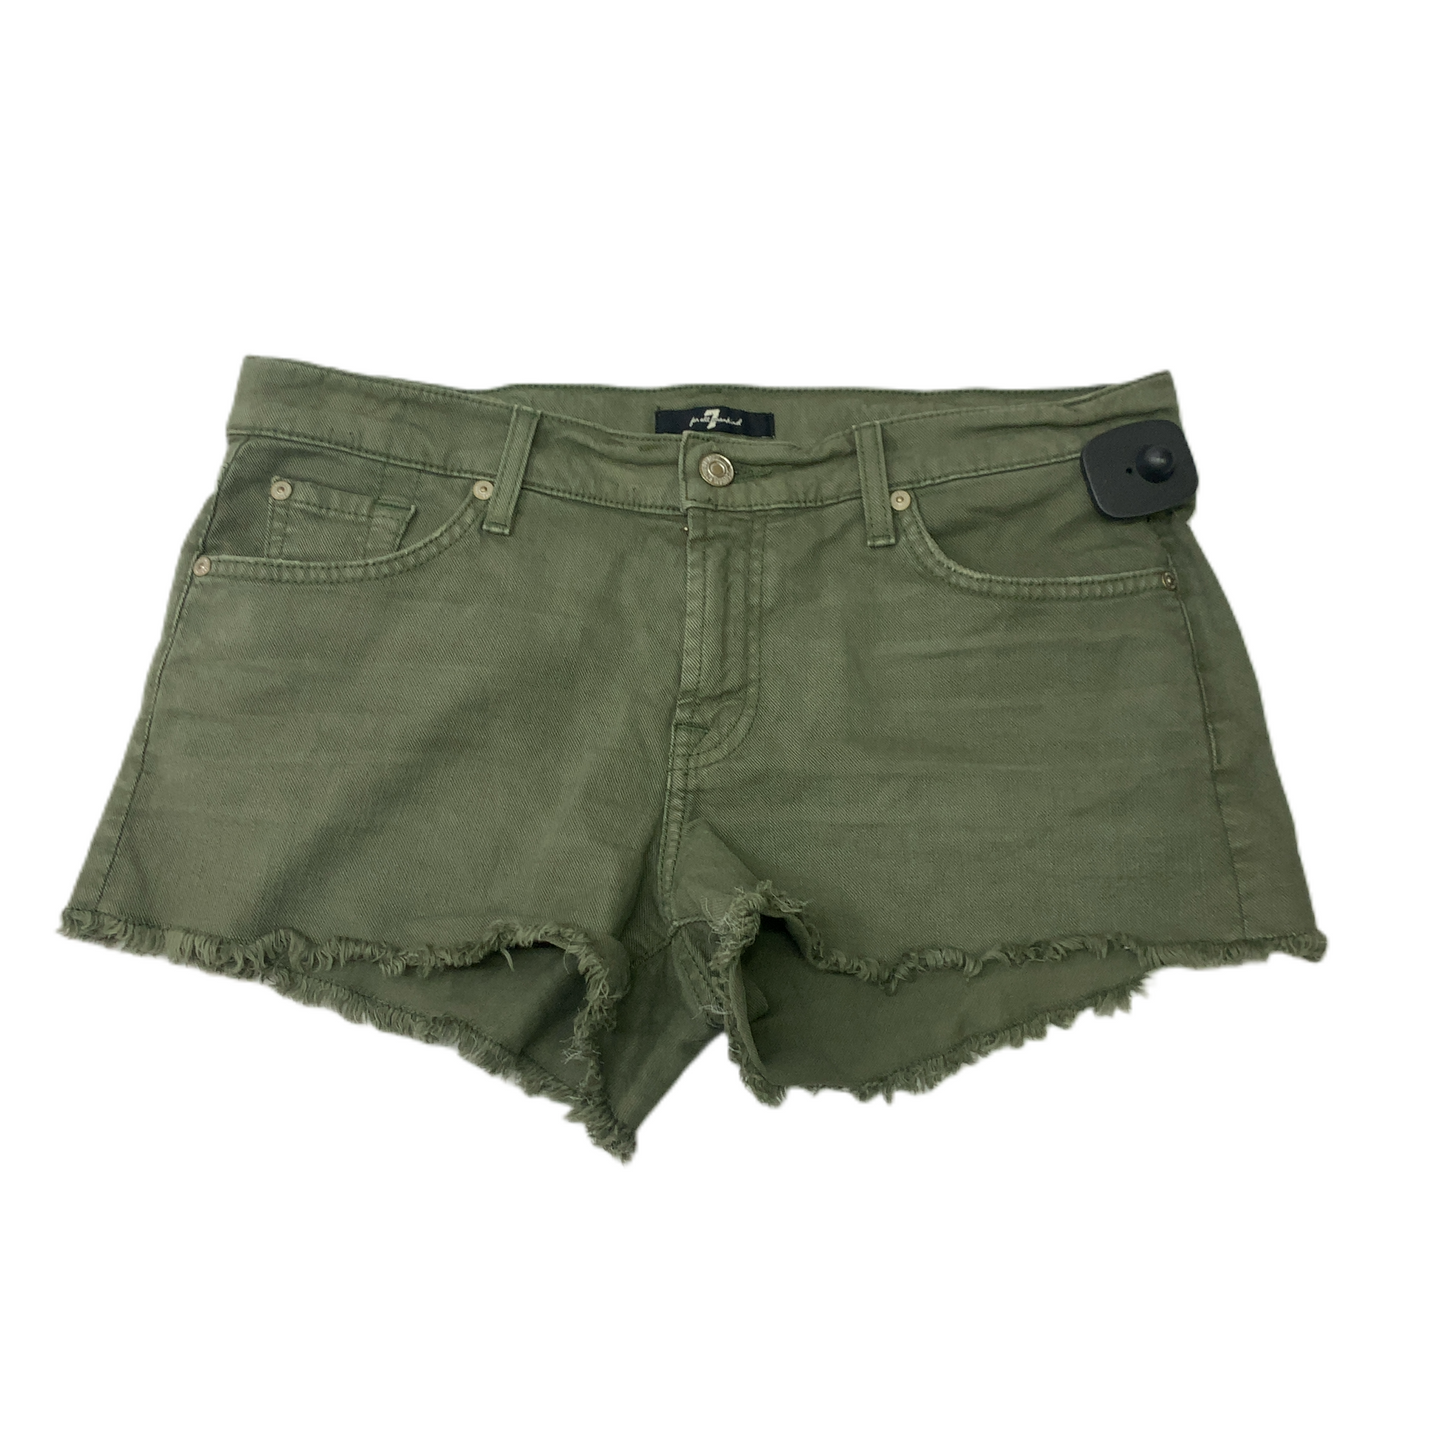 Green  Shorts Designer By 7 For All Mankind  Size: 8